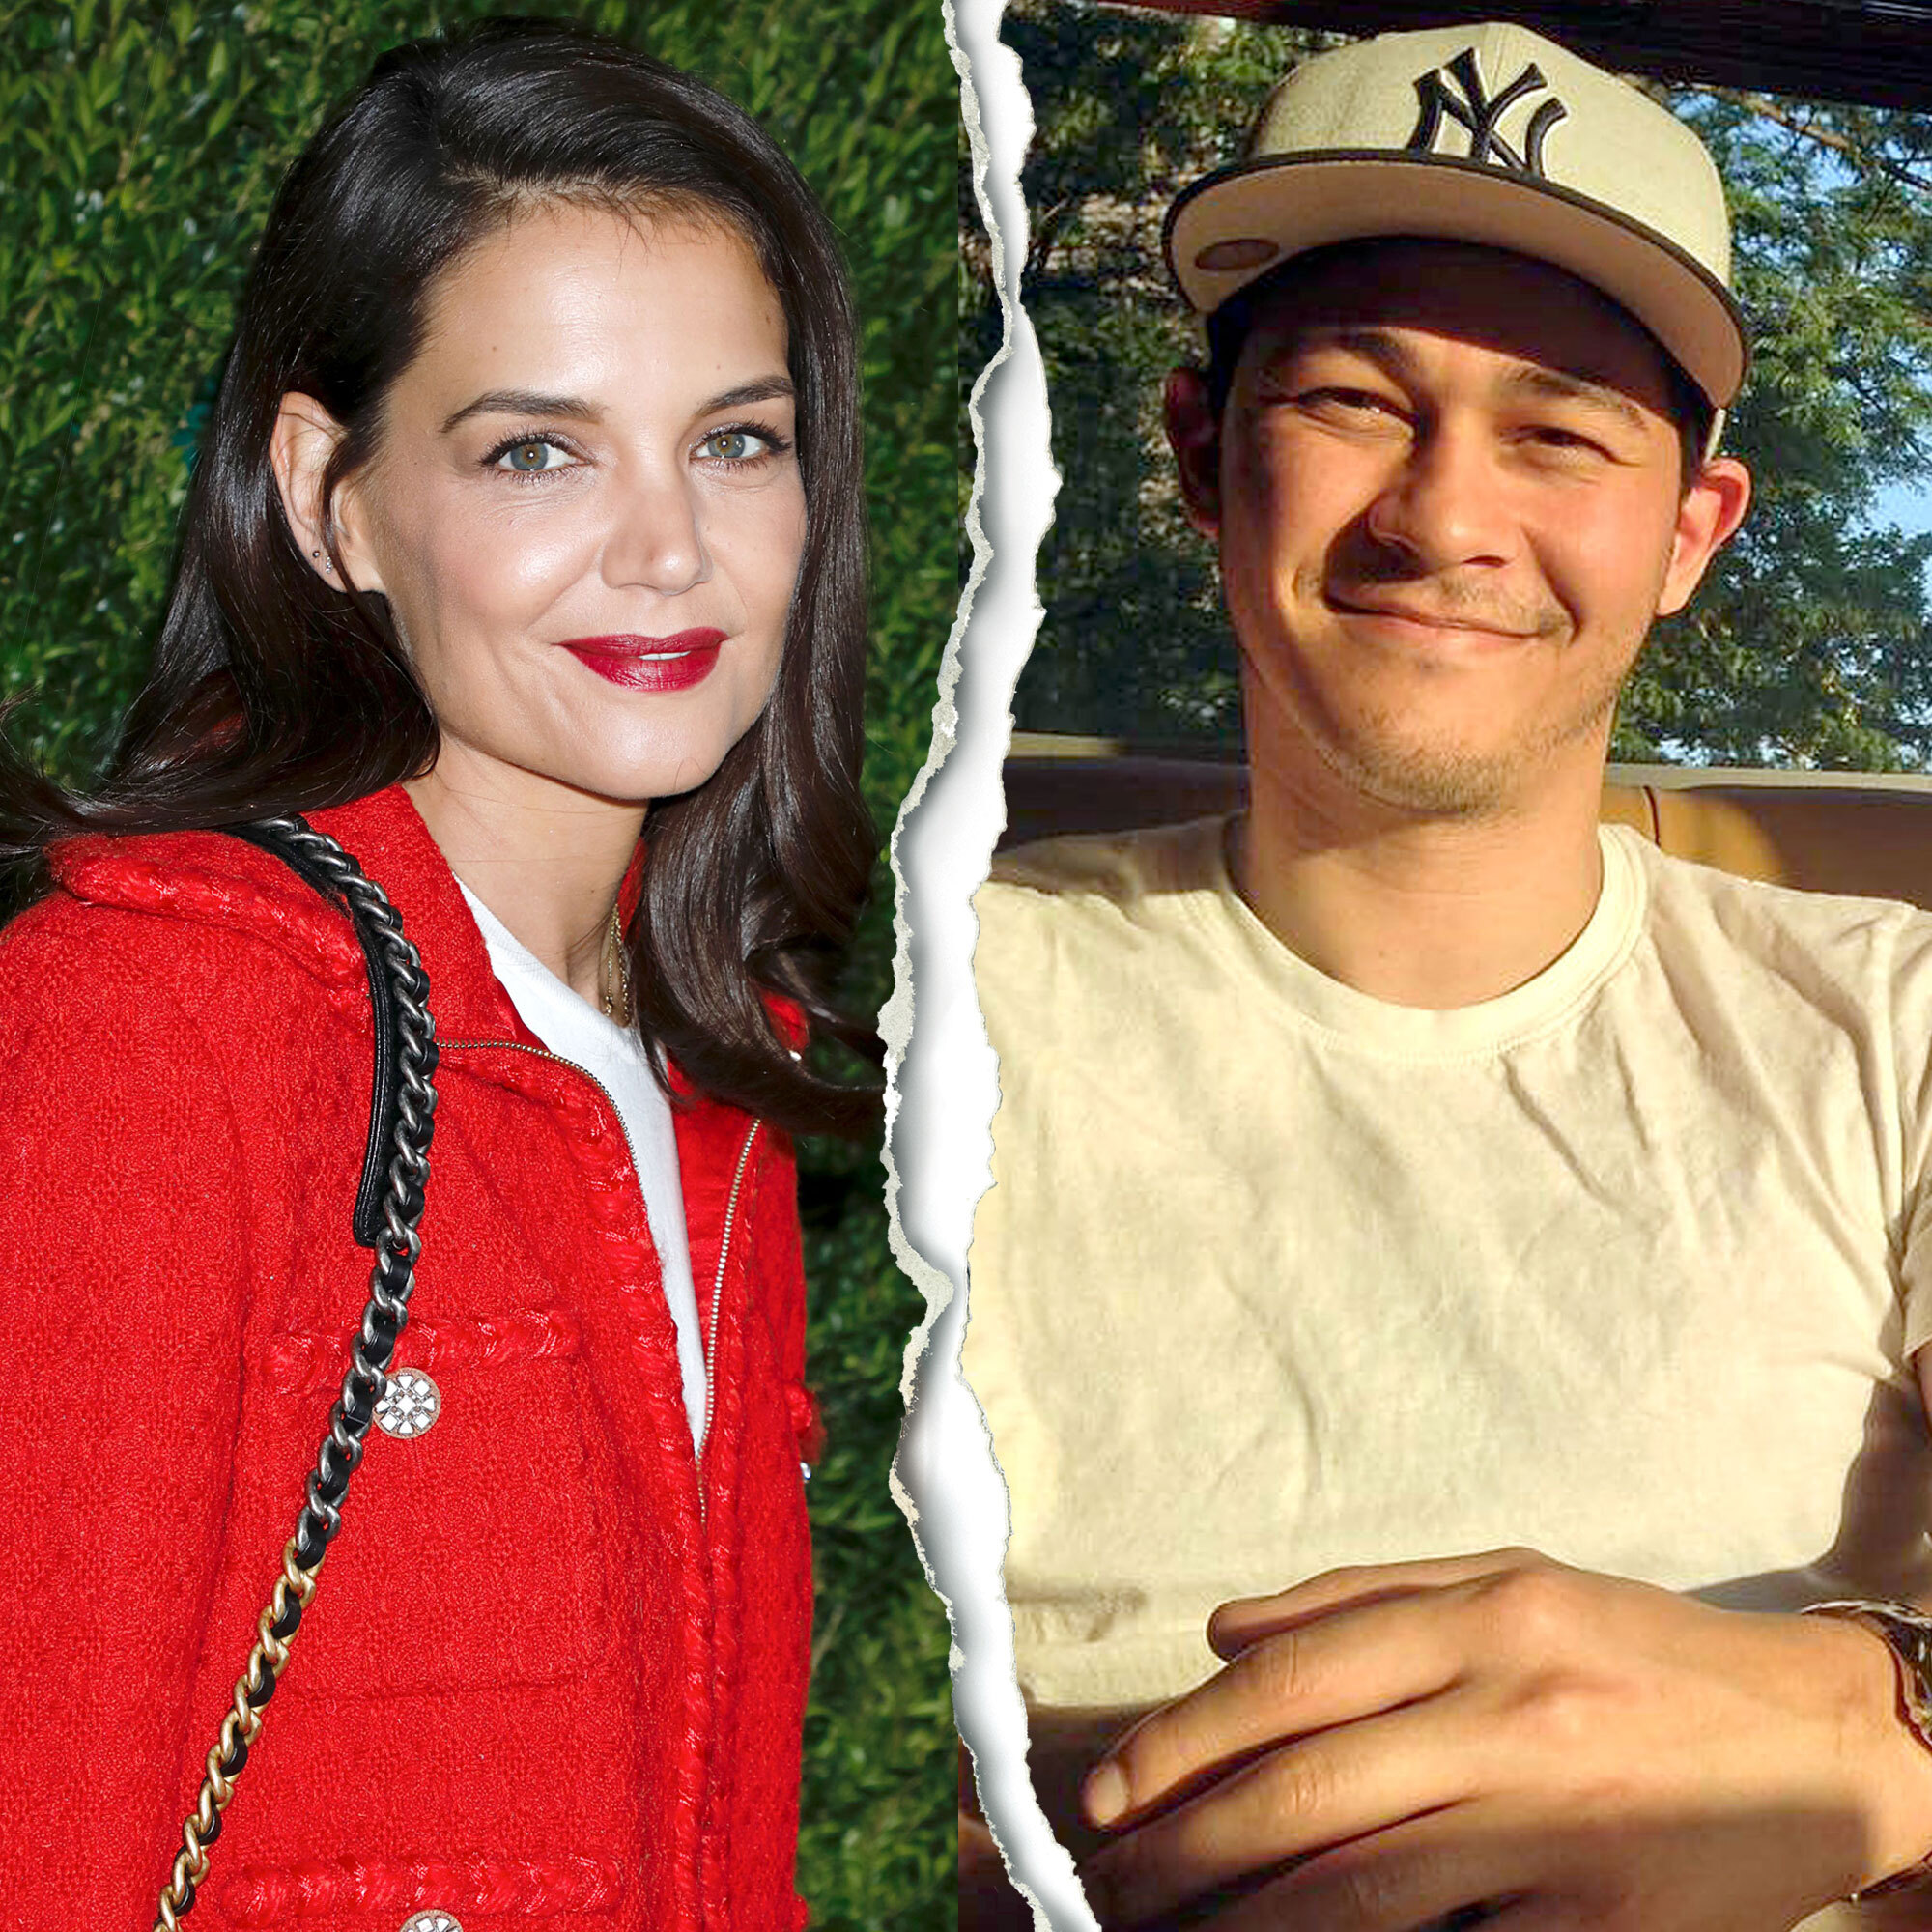 Orlando dating in katie who holmes is today Katie Holmes